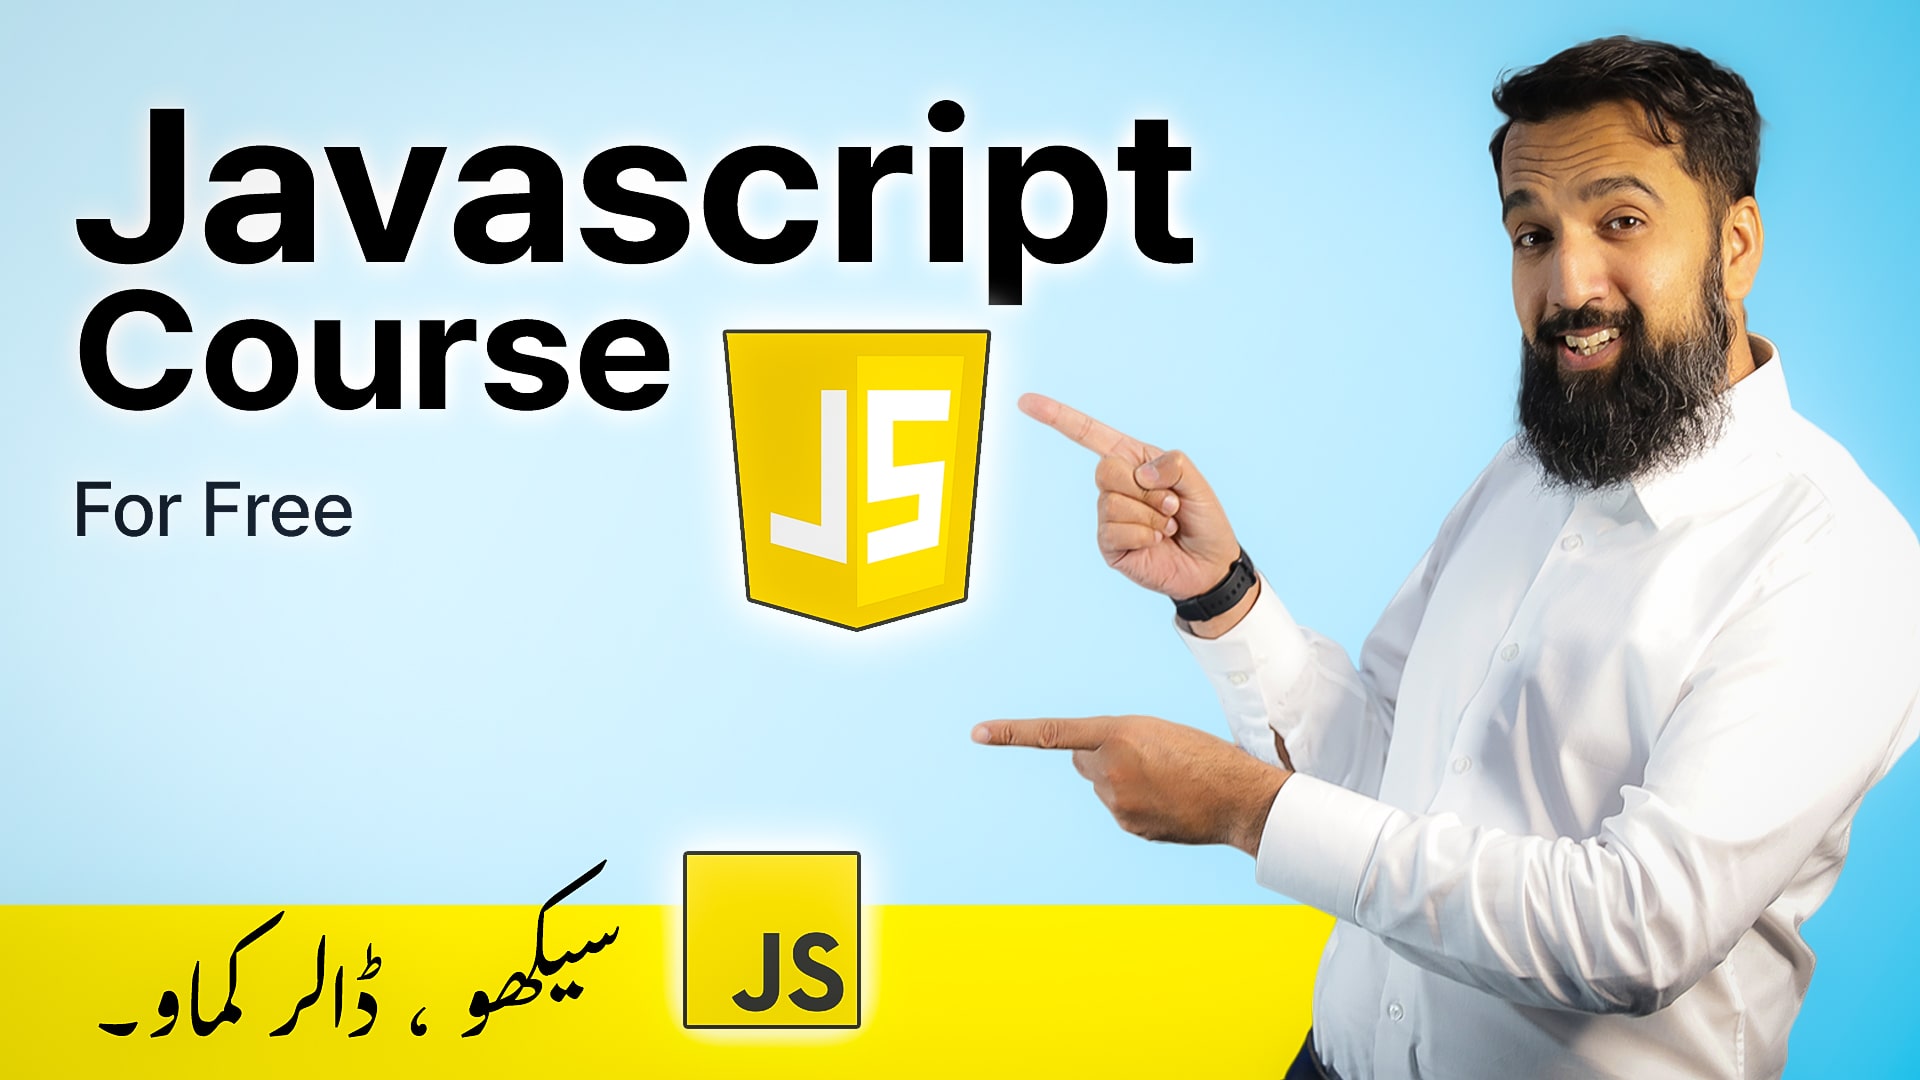  javascript-course-for-beginners-programmers-by-azadchaiwala-64f855ad60fe3393101851.jpg 